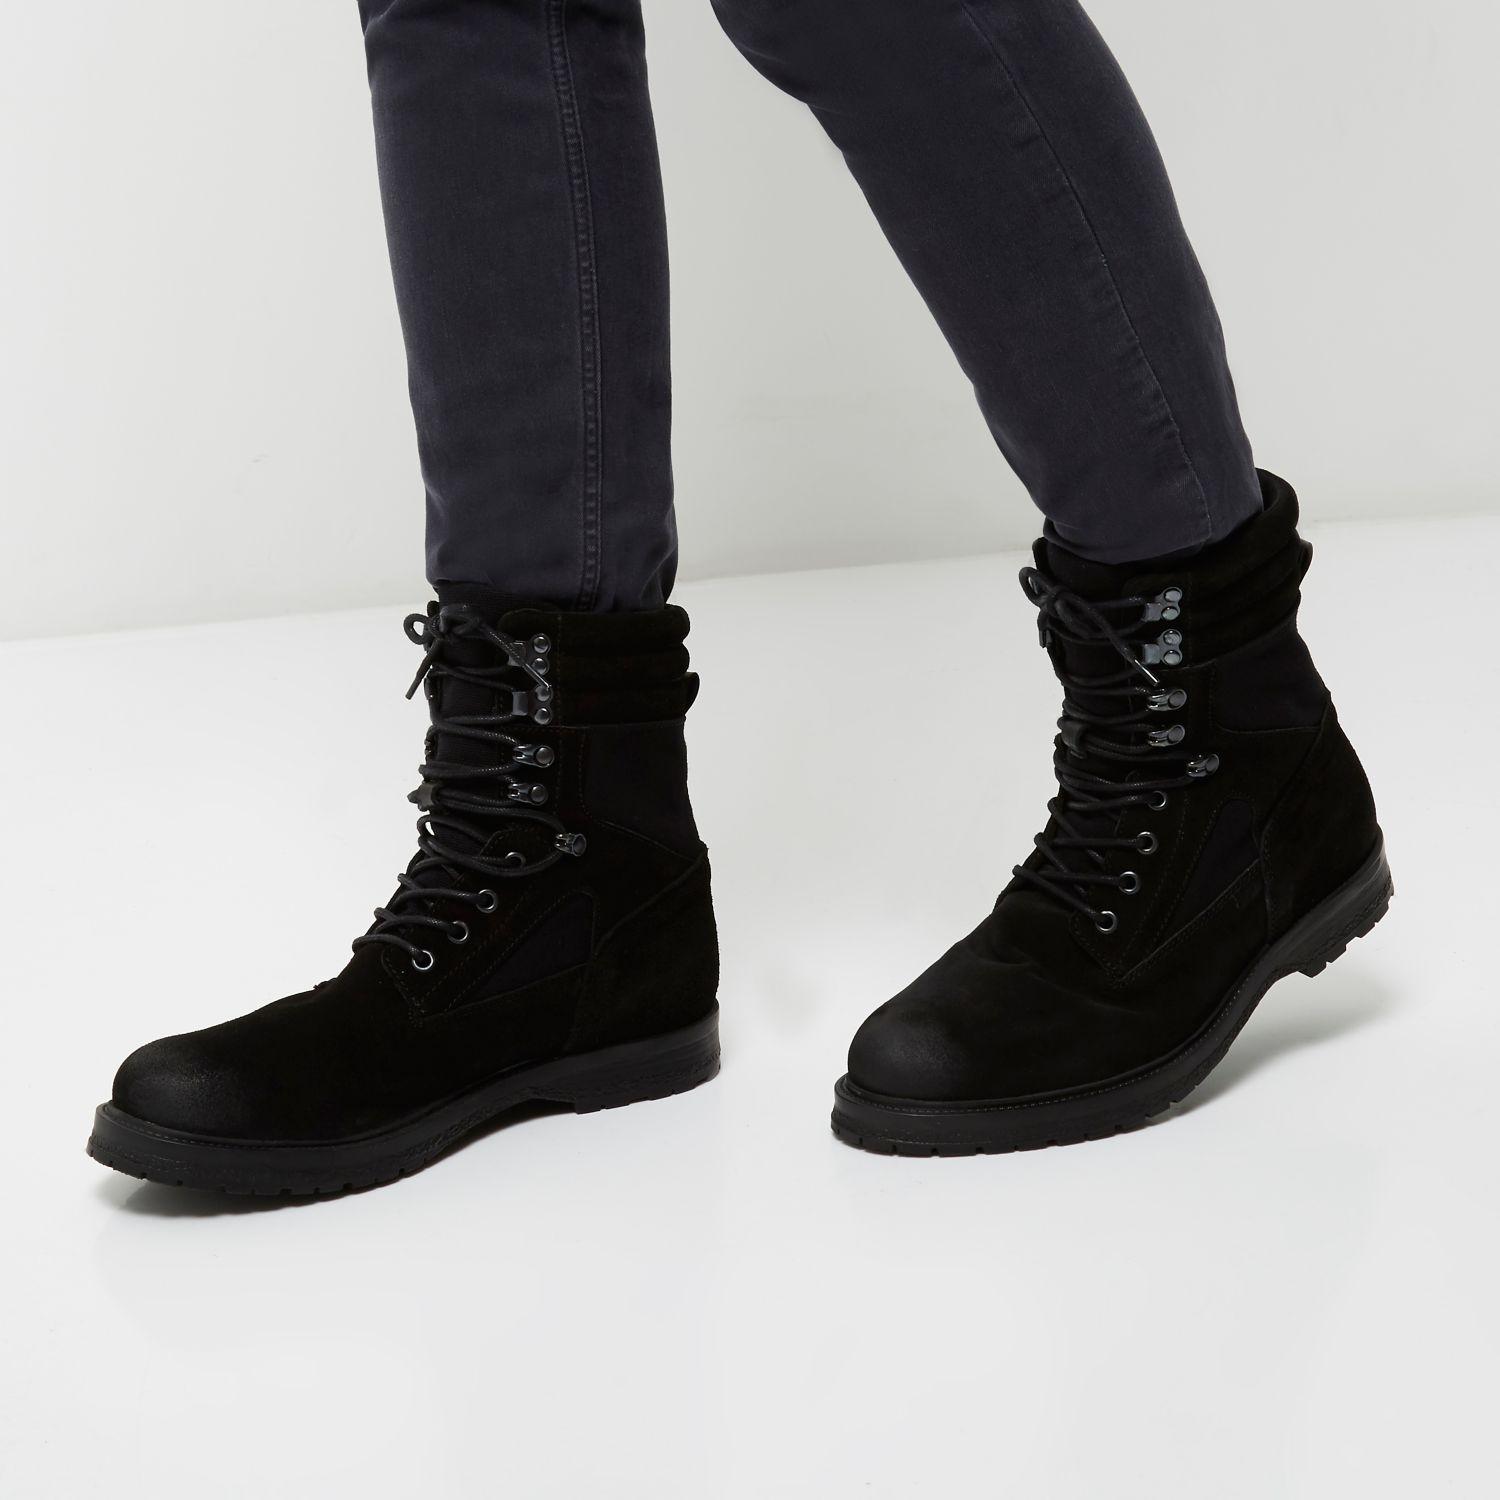 River Island Black Suede Combat Boots for Men - Lyst